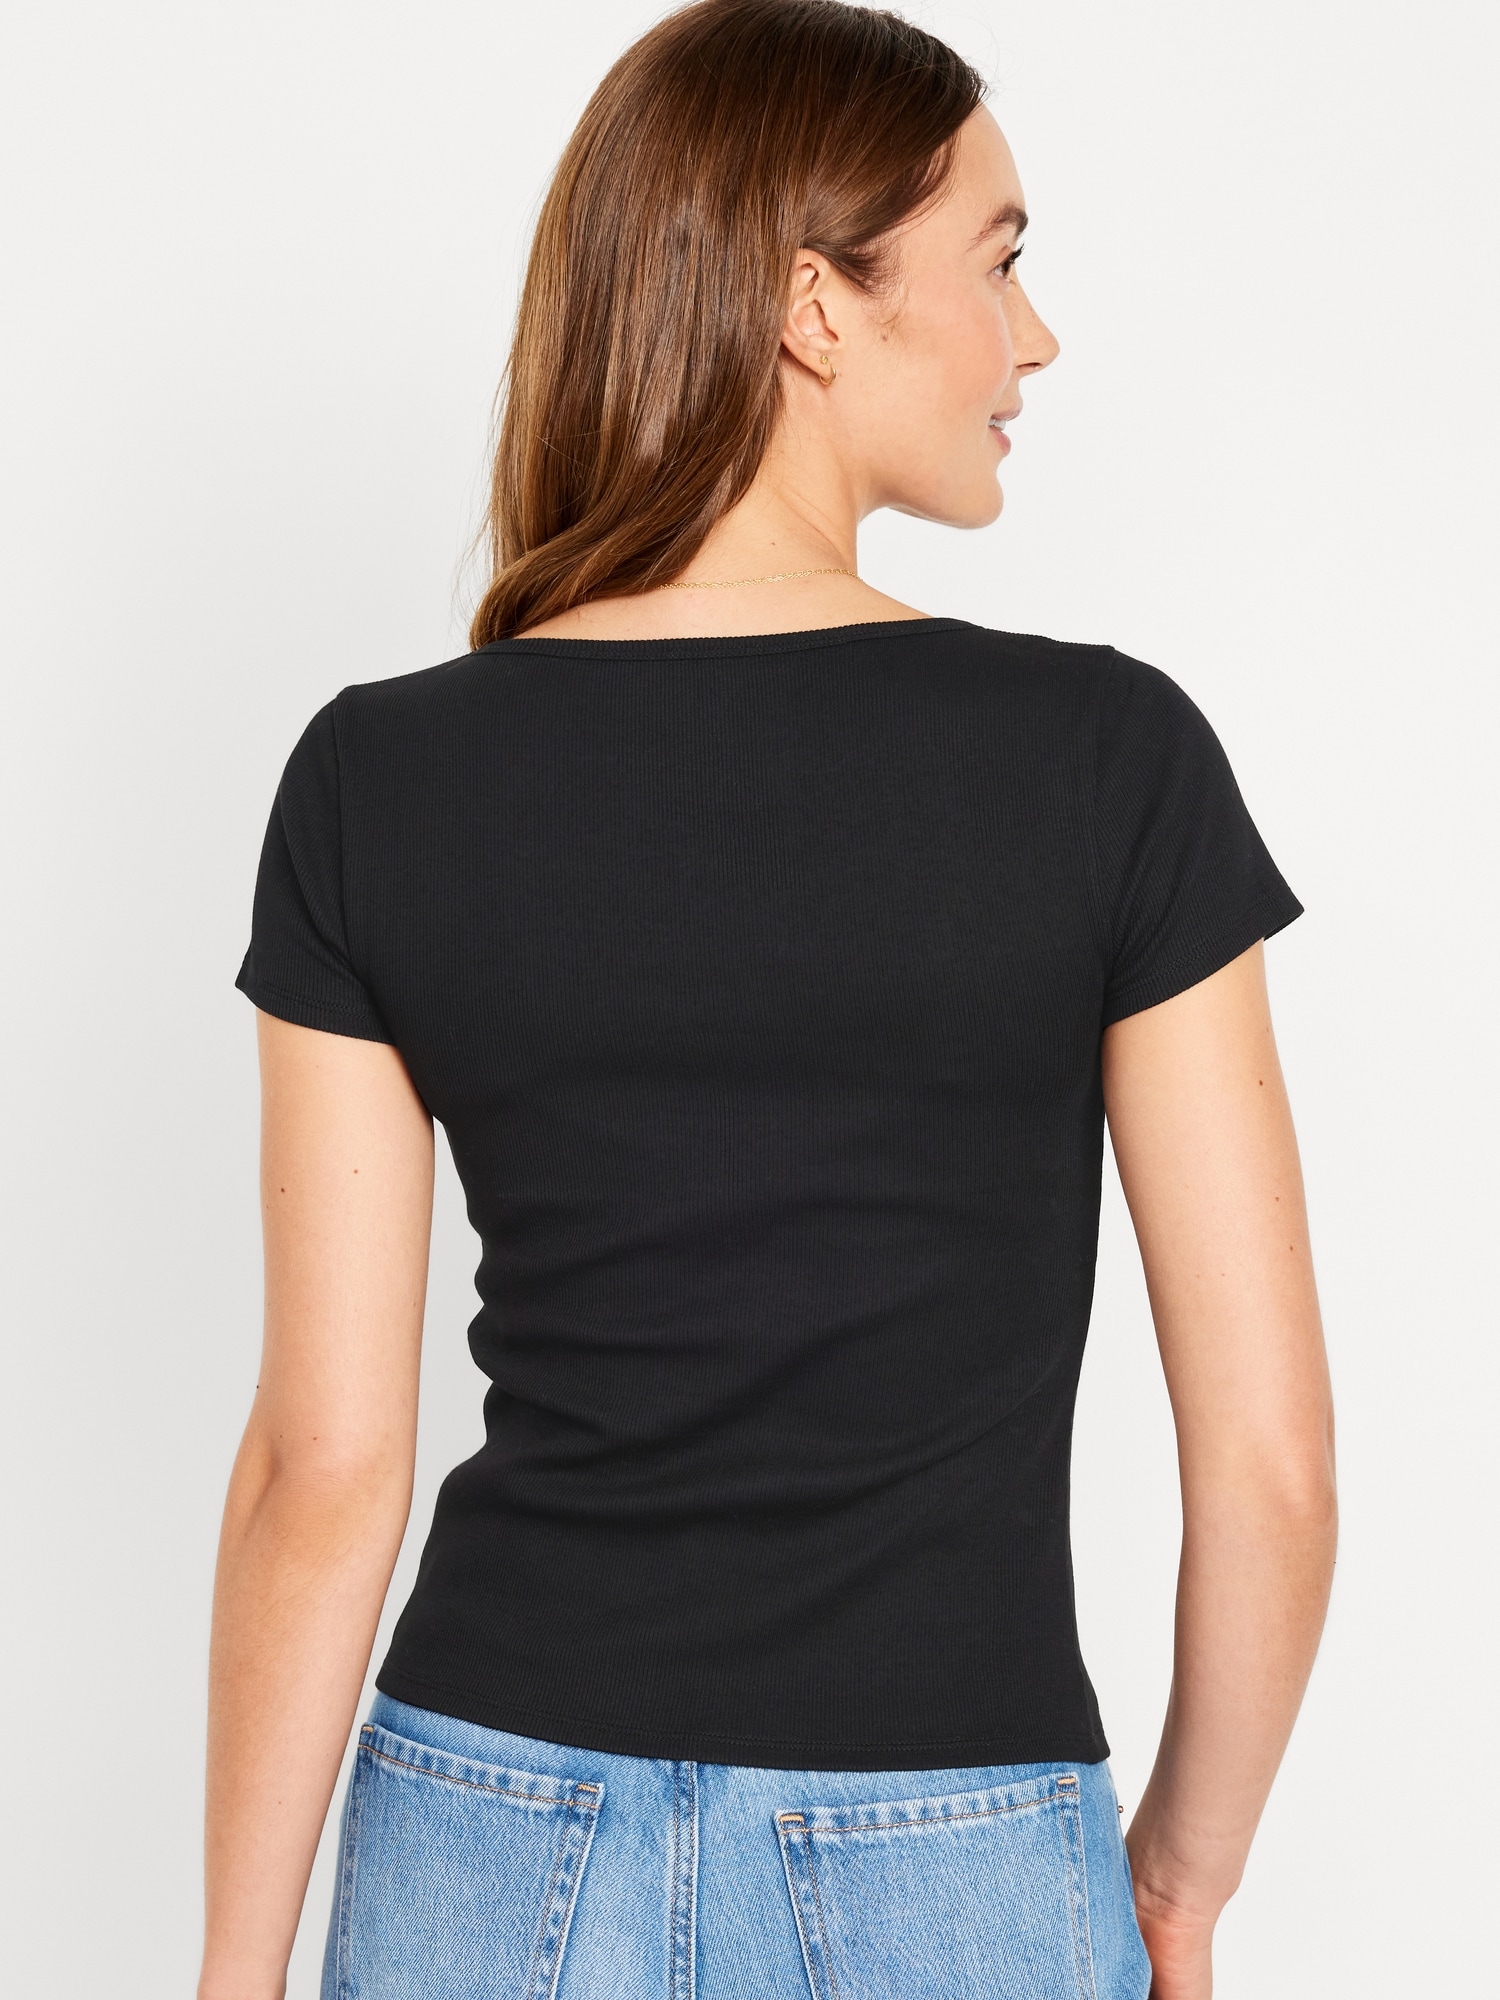 Fitted Square-Neck T-Shirt